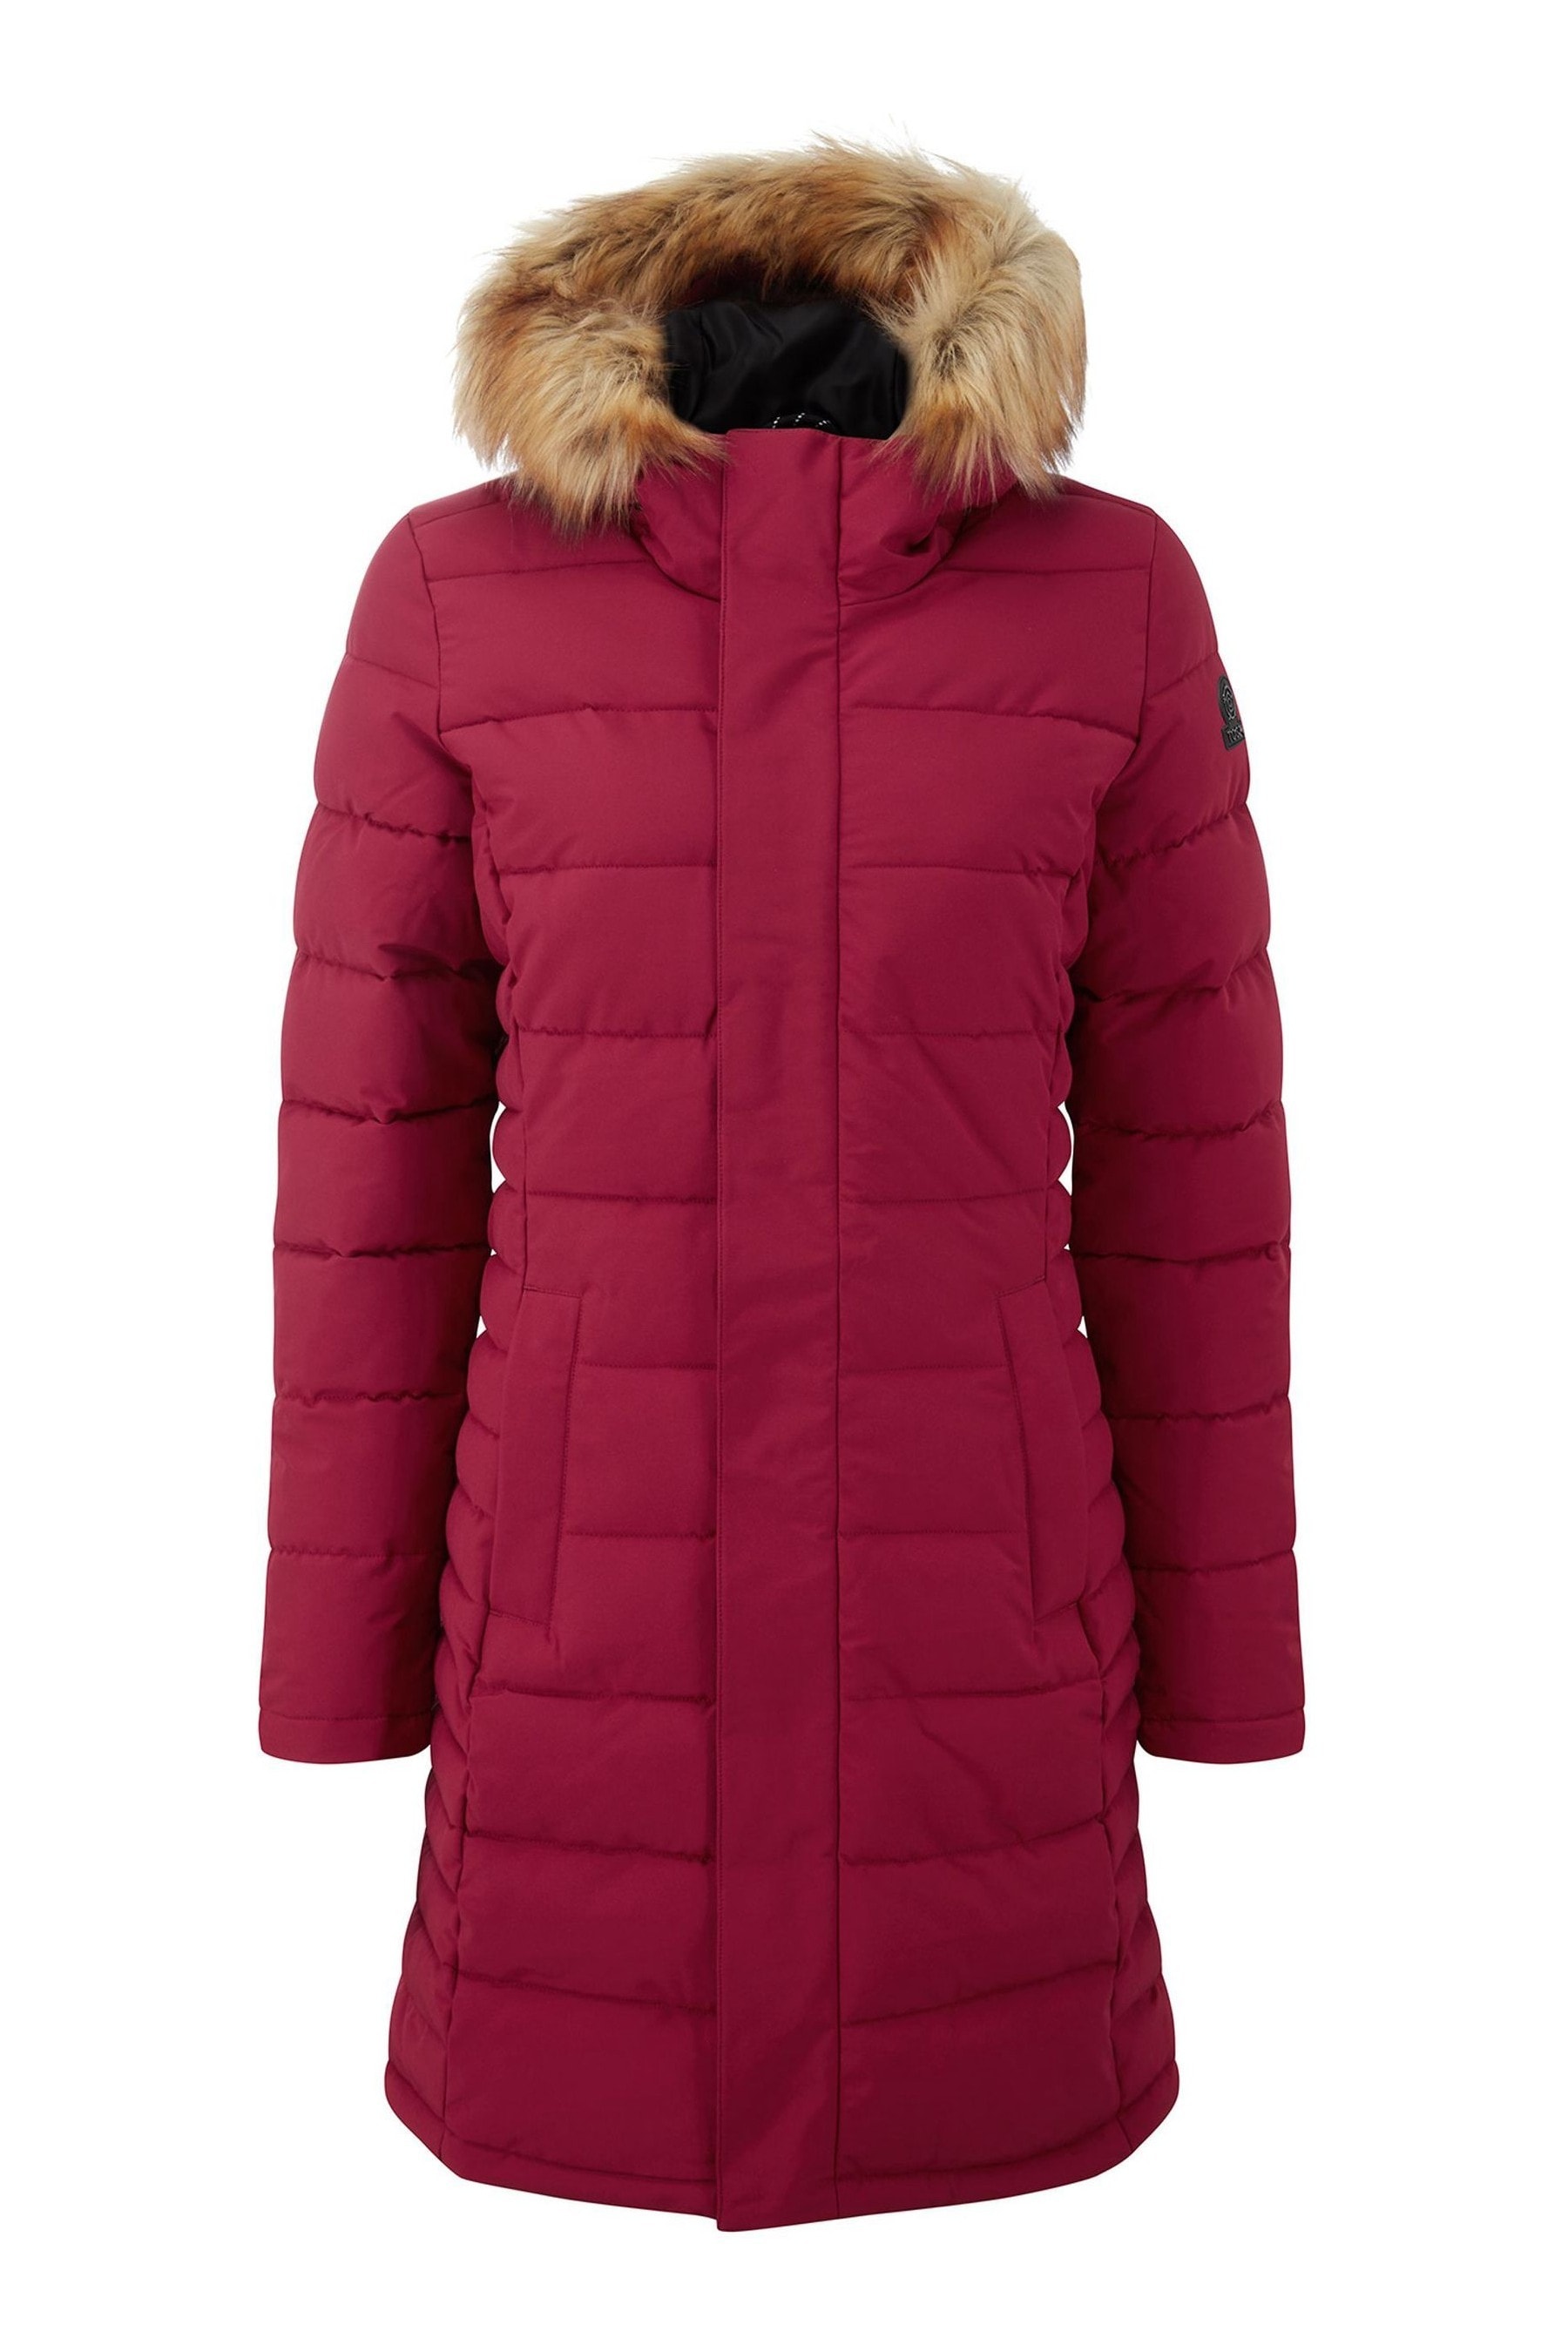 Buy Tog 24 Red Firbeck Long Insulated Jacket from the Next UK online shop